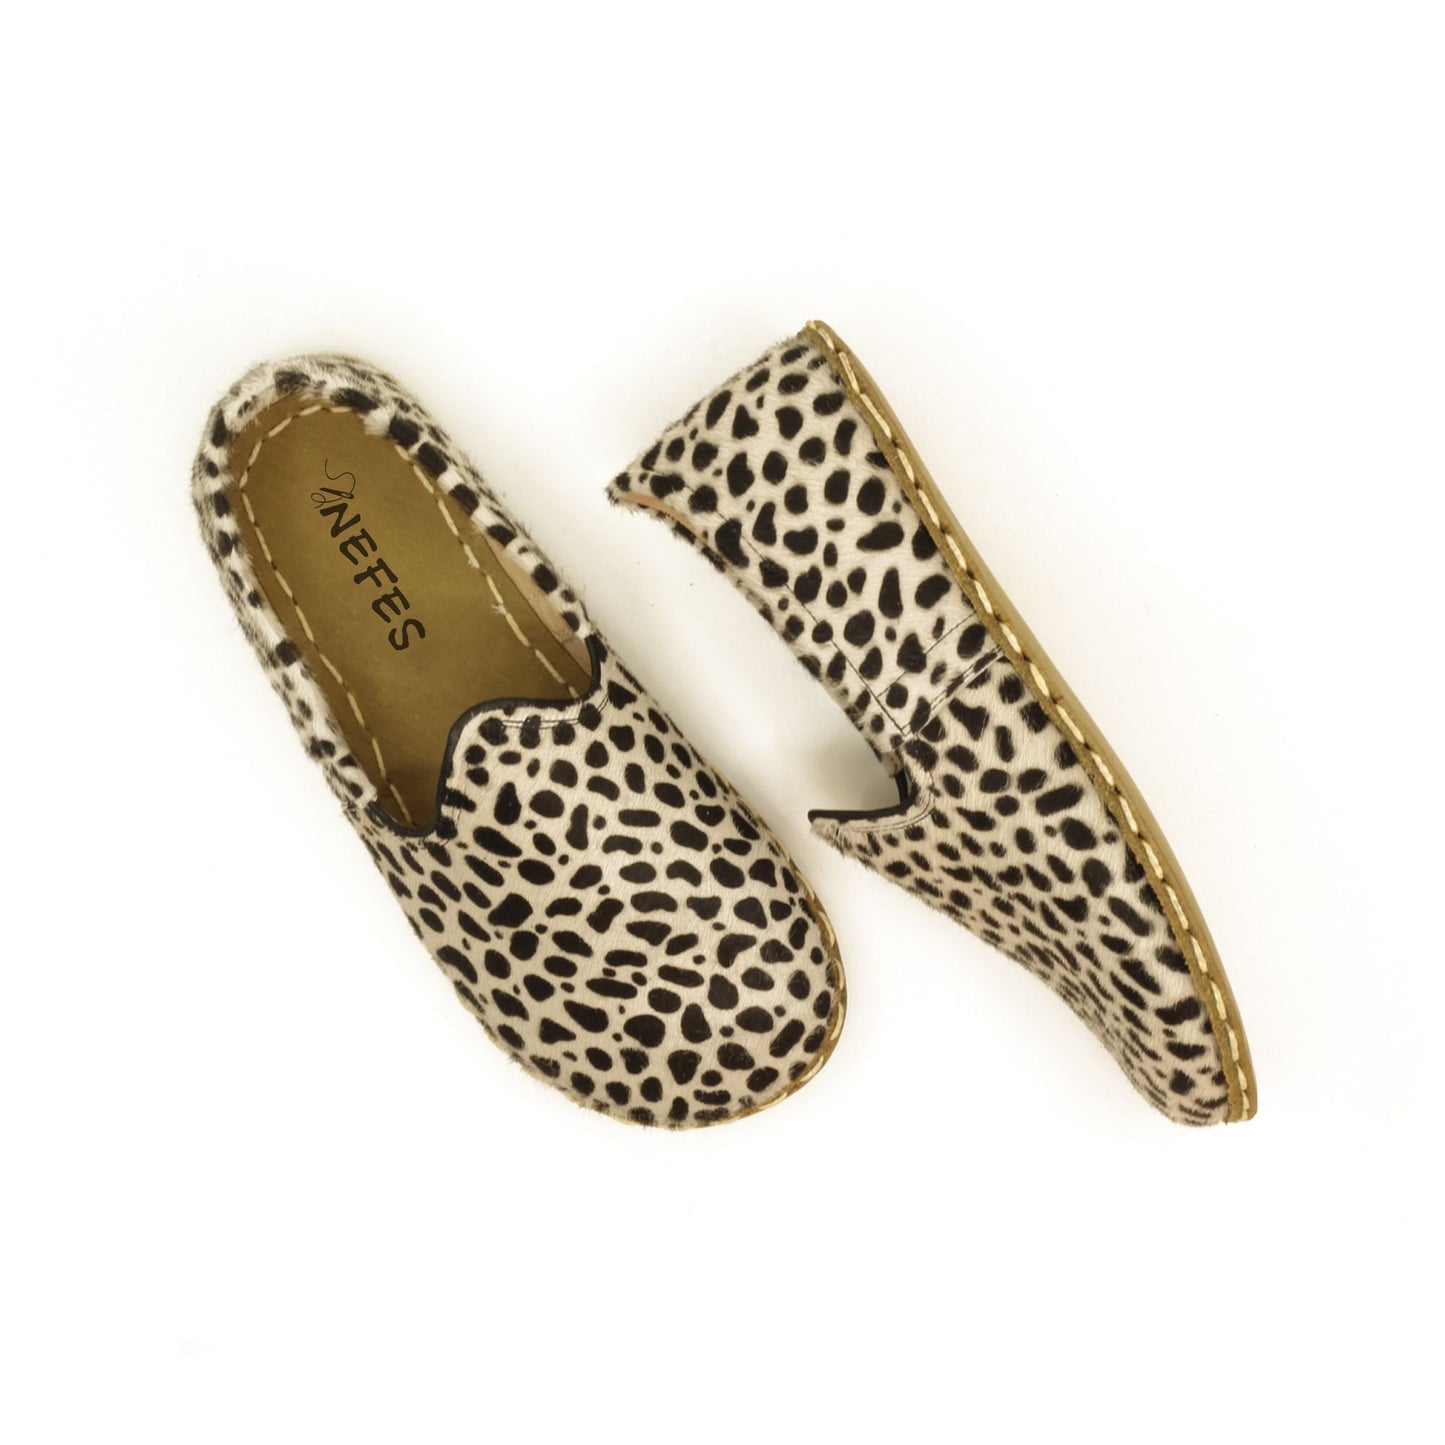 Women - Handmade - Barefoot - Leather Shoes, Classic- Leopard